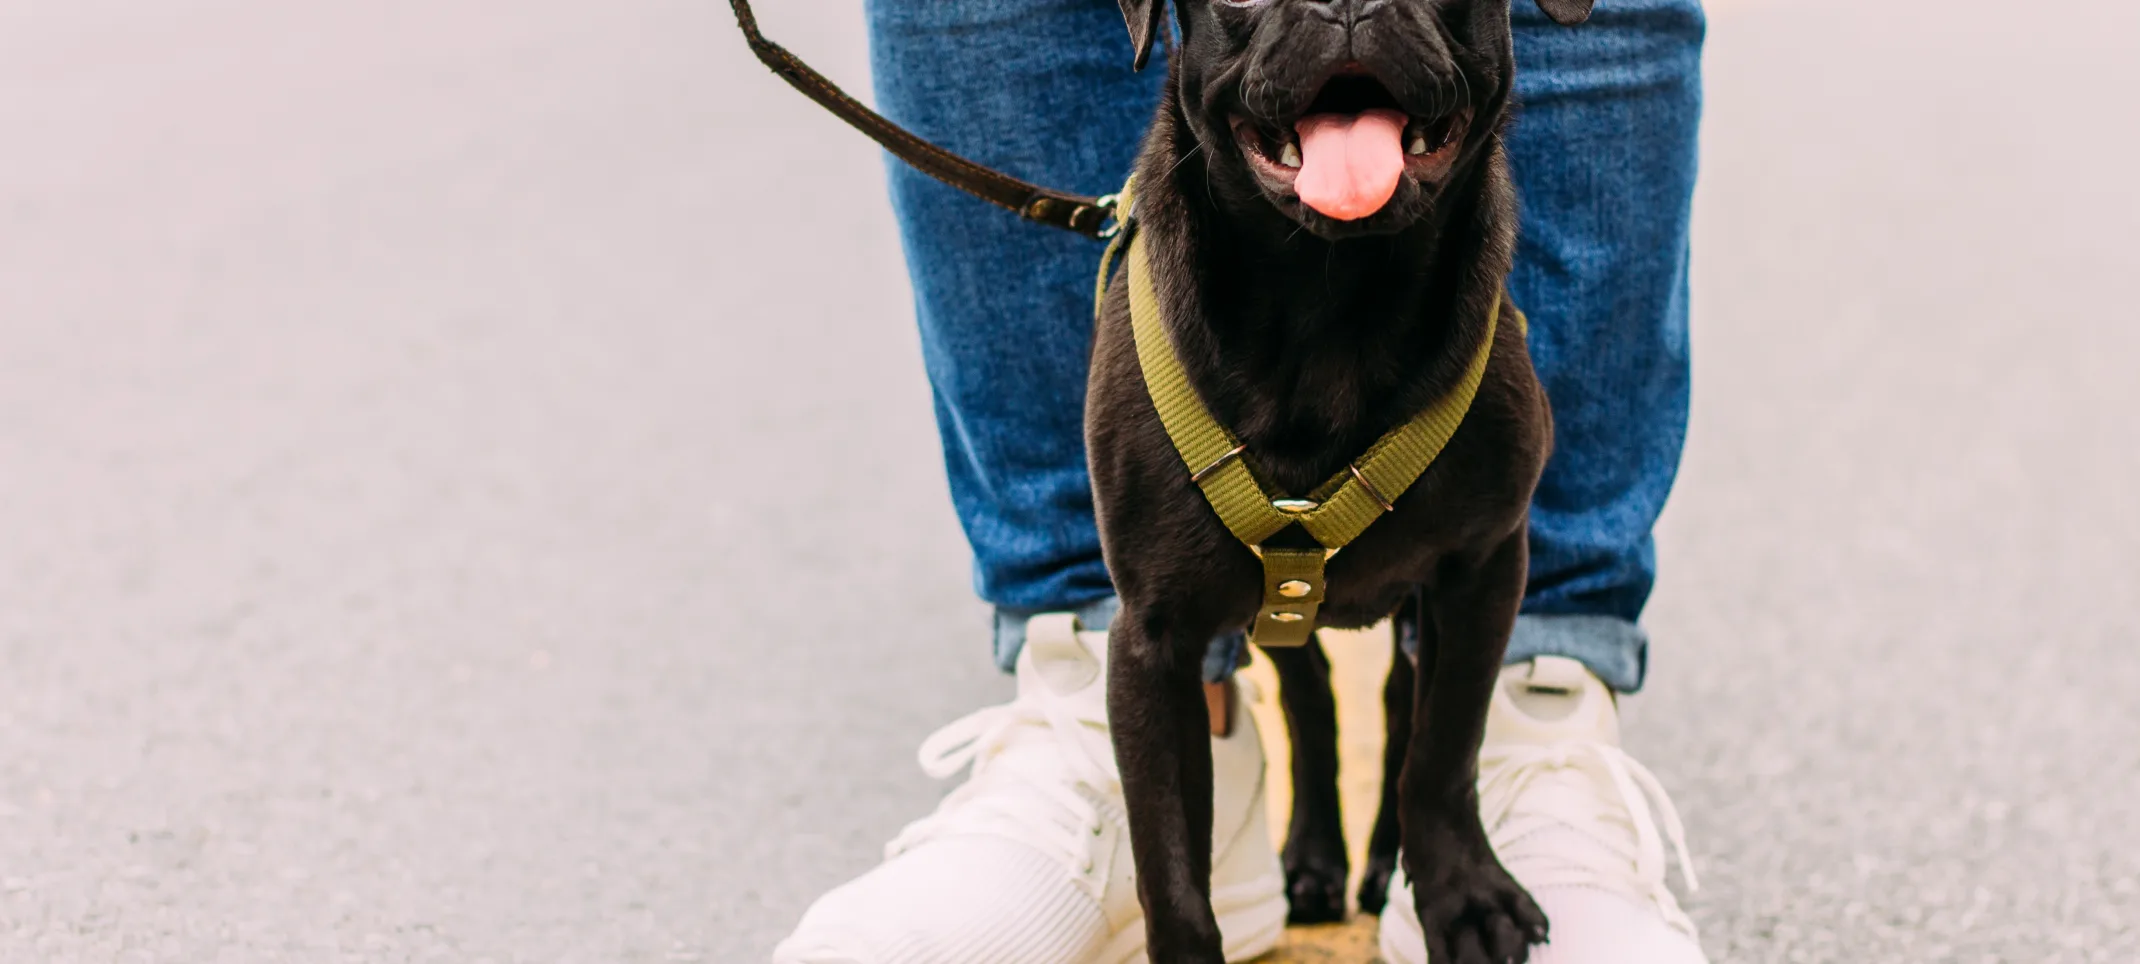 A black pug smiling and standing outside on the owner's shoe